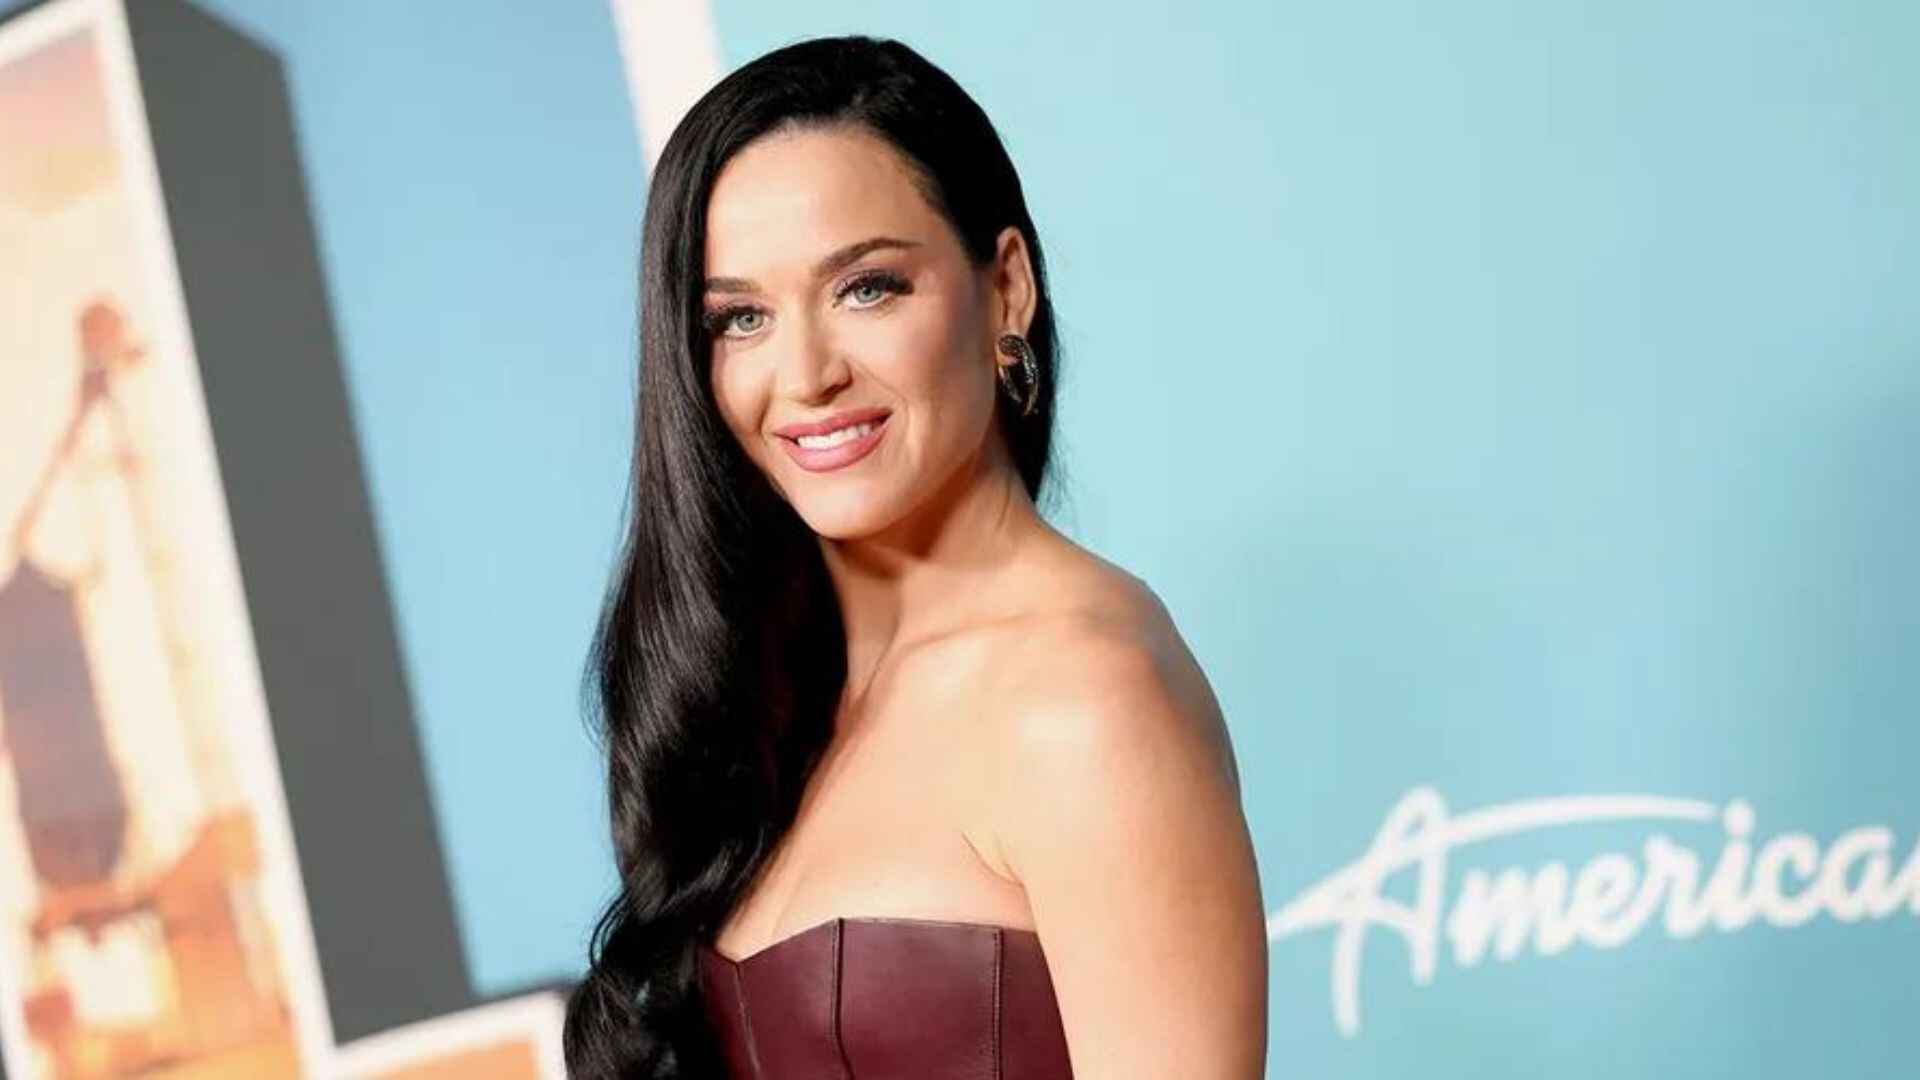 Katy Perry to release a new single called Woman's World